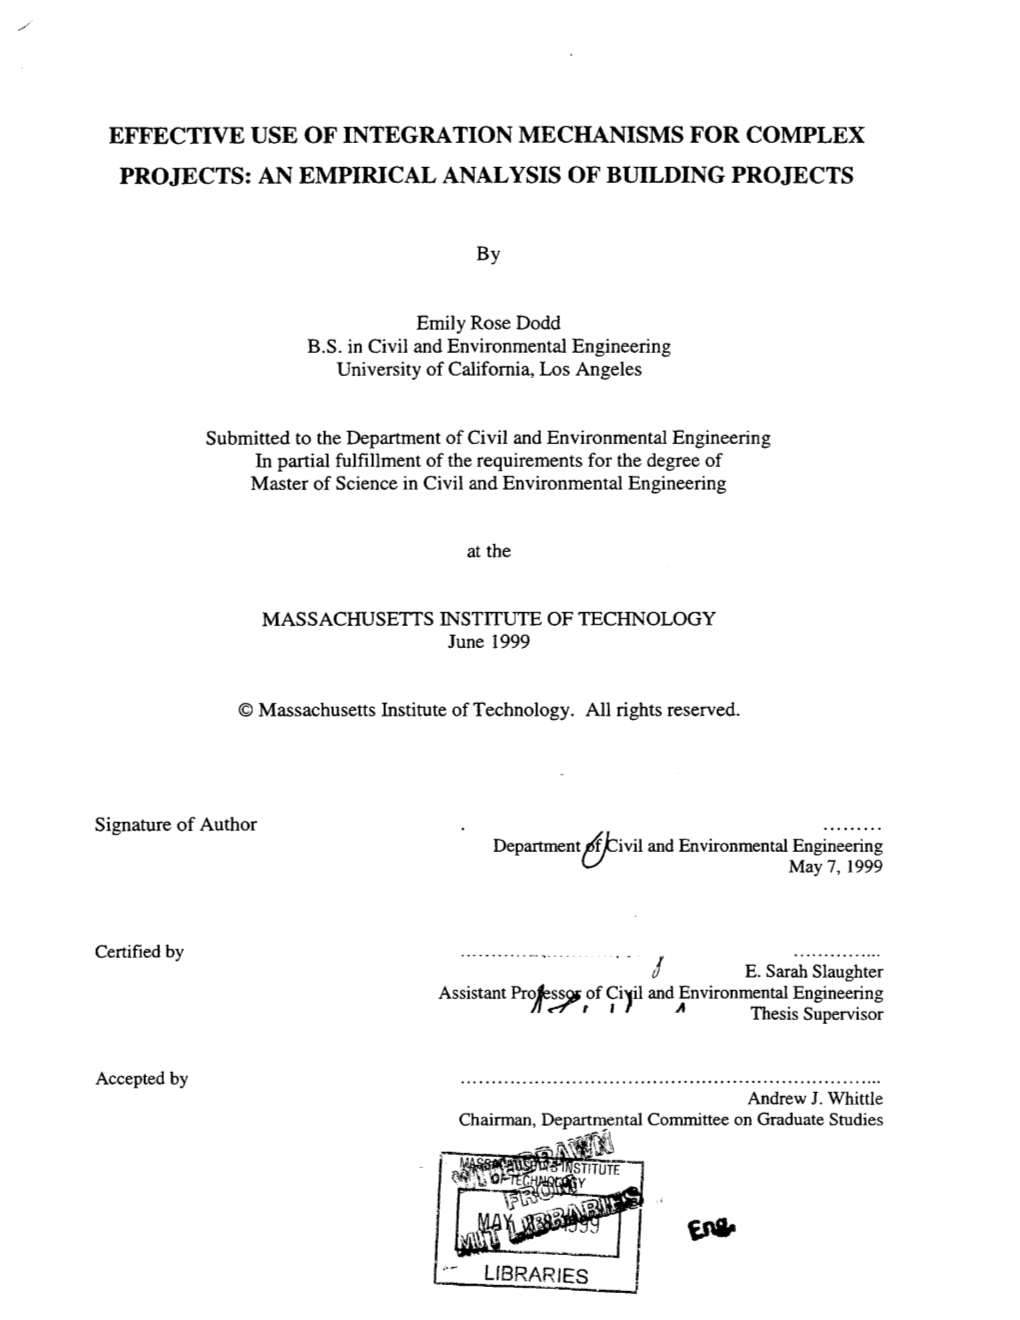 An Empirical Analysis of Building Projects